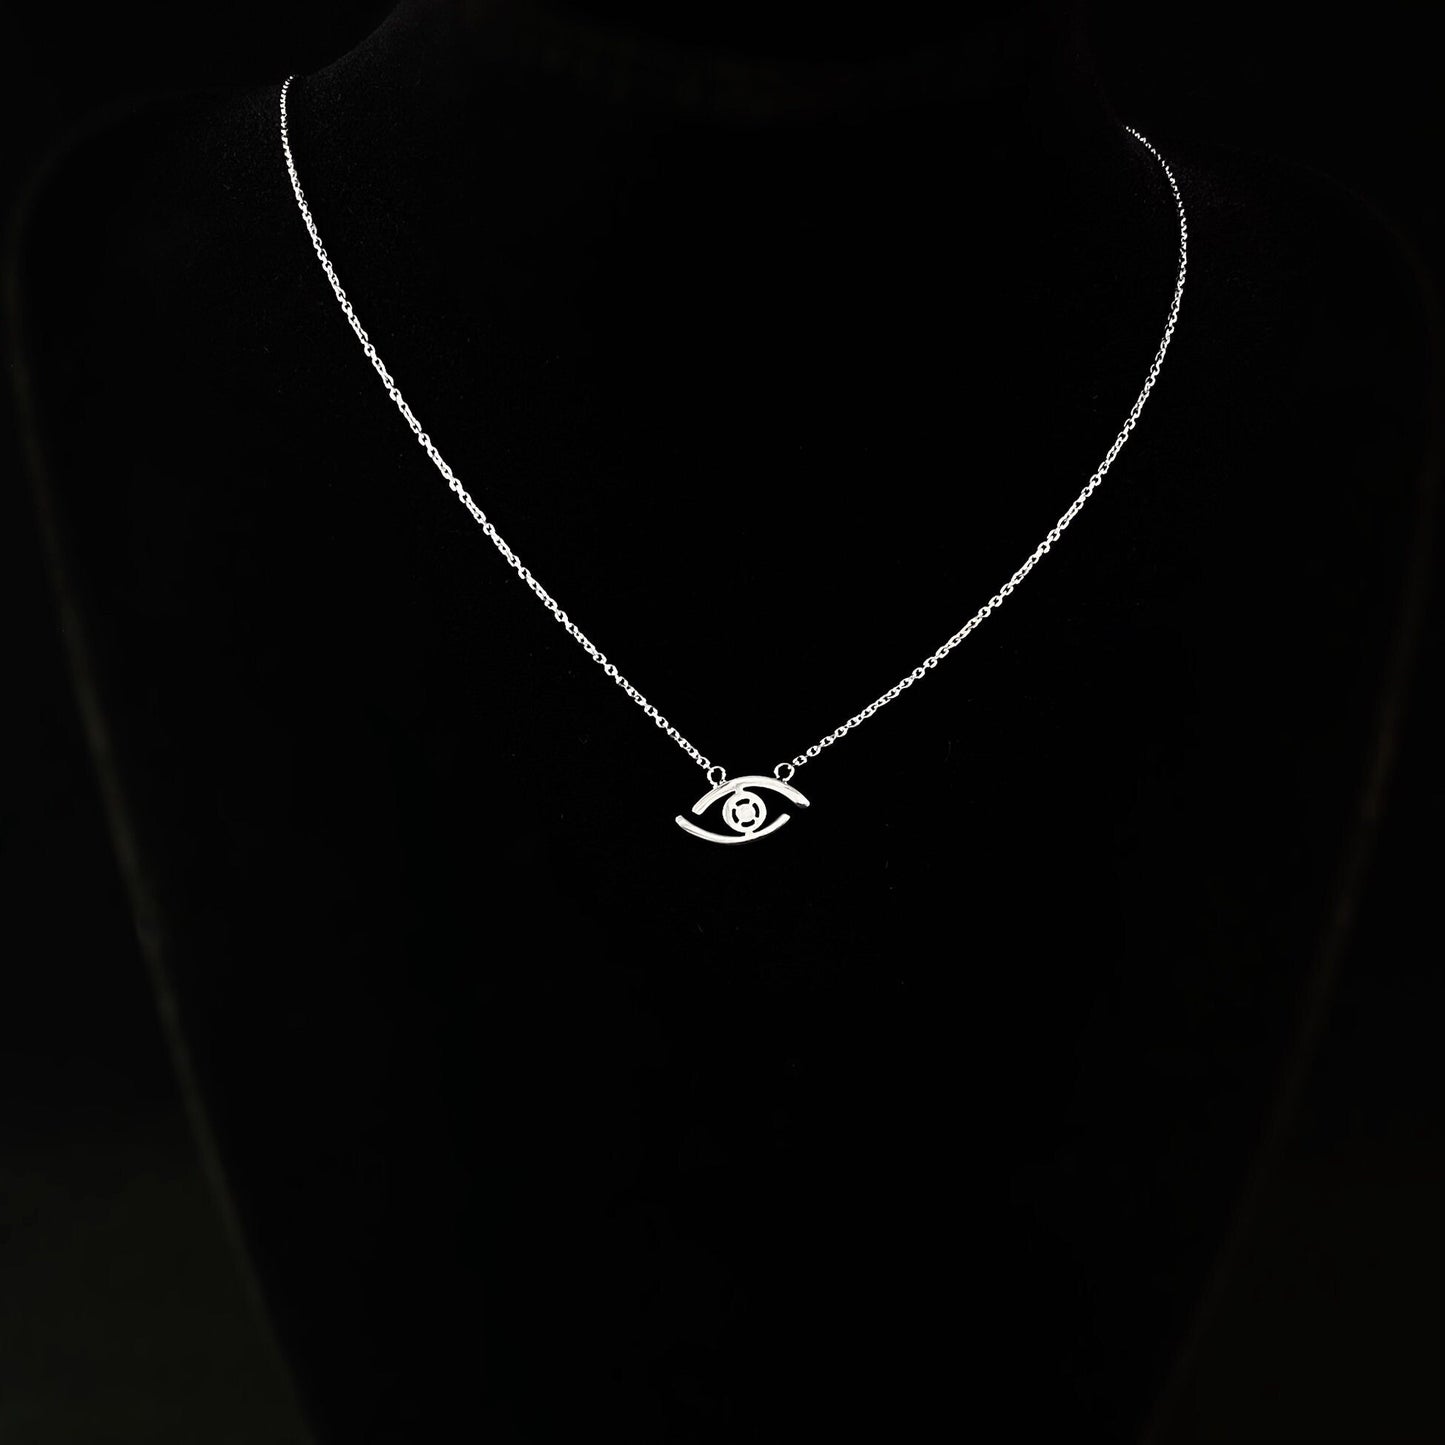 Dainty Silver All Seeing Eye Pendant Necklace - Sabrina